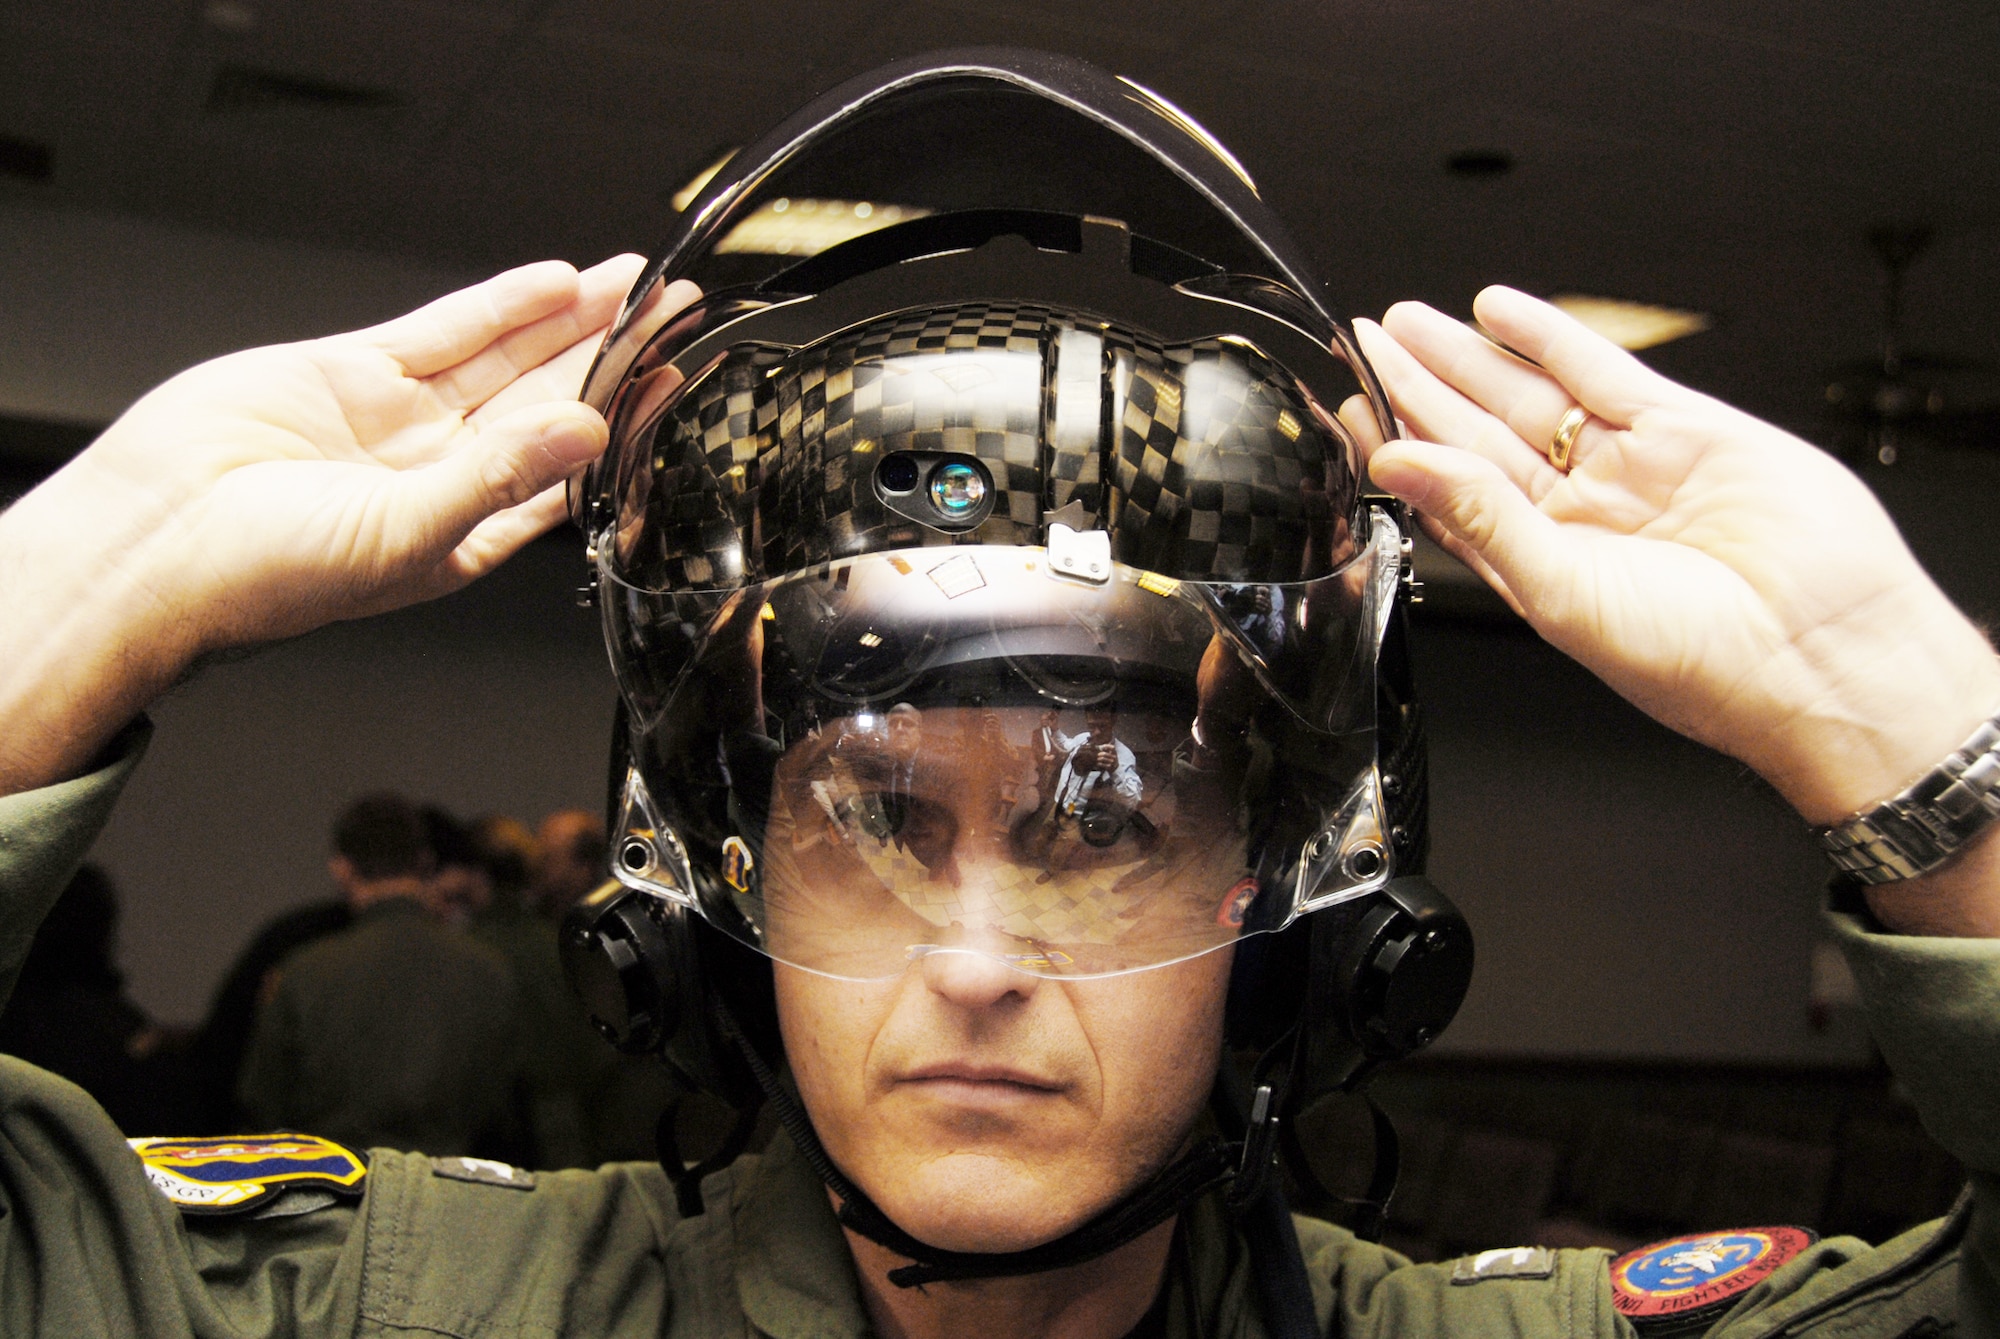 Navy Capt. Mike Saunders tries on the new F-35 Lightning II joint strike fighter helmet after getting measured for the new flight suit Feb. 25, 2010, at Eglin Air Force Base, Fla. Captain Saunders is the 33rd Operations Group deputy commander. (U.S. Air Force photo/Airman 1st Class Anthony Jennings)